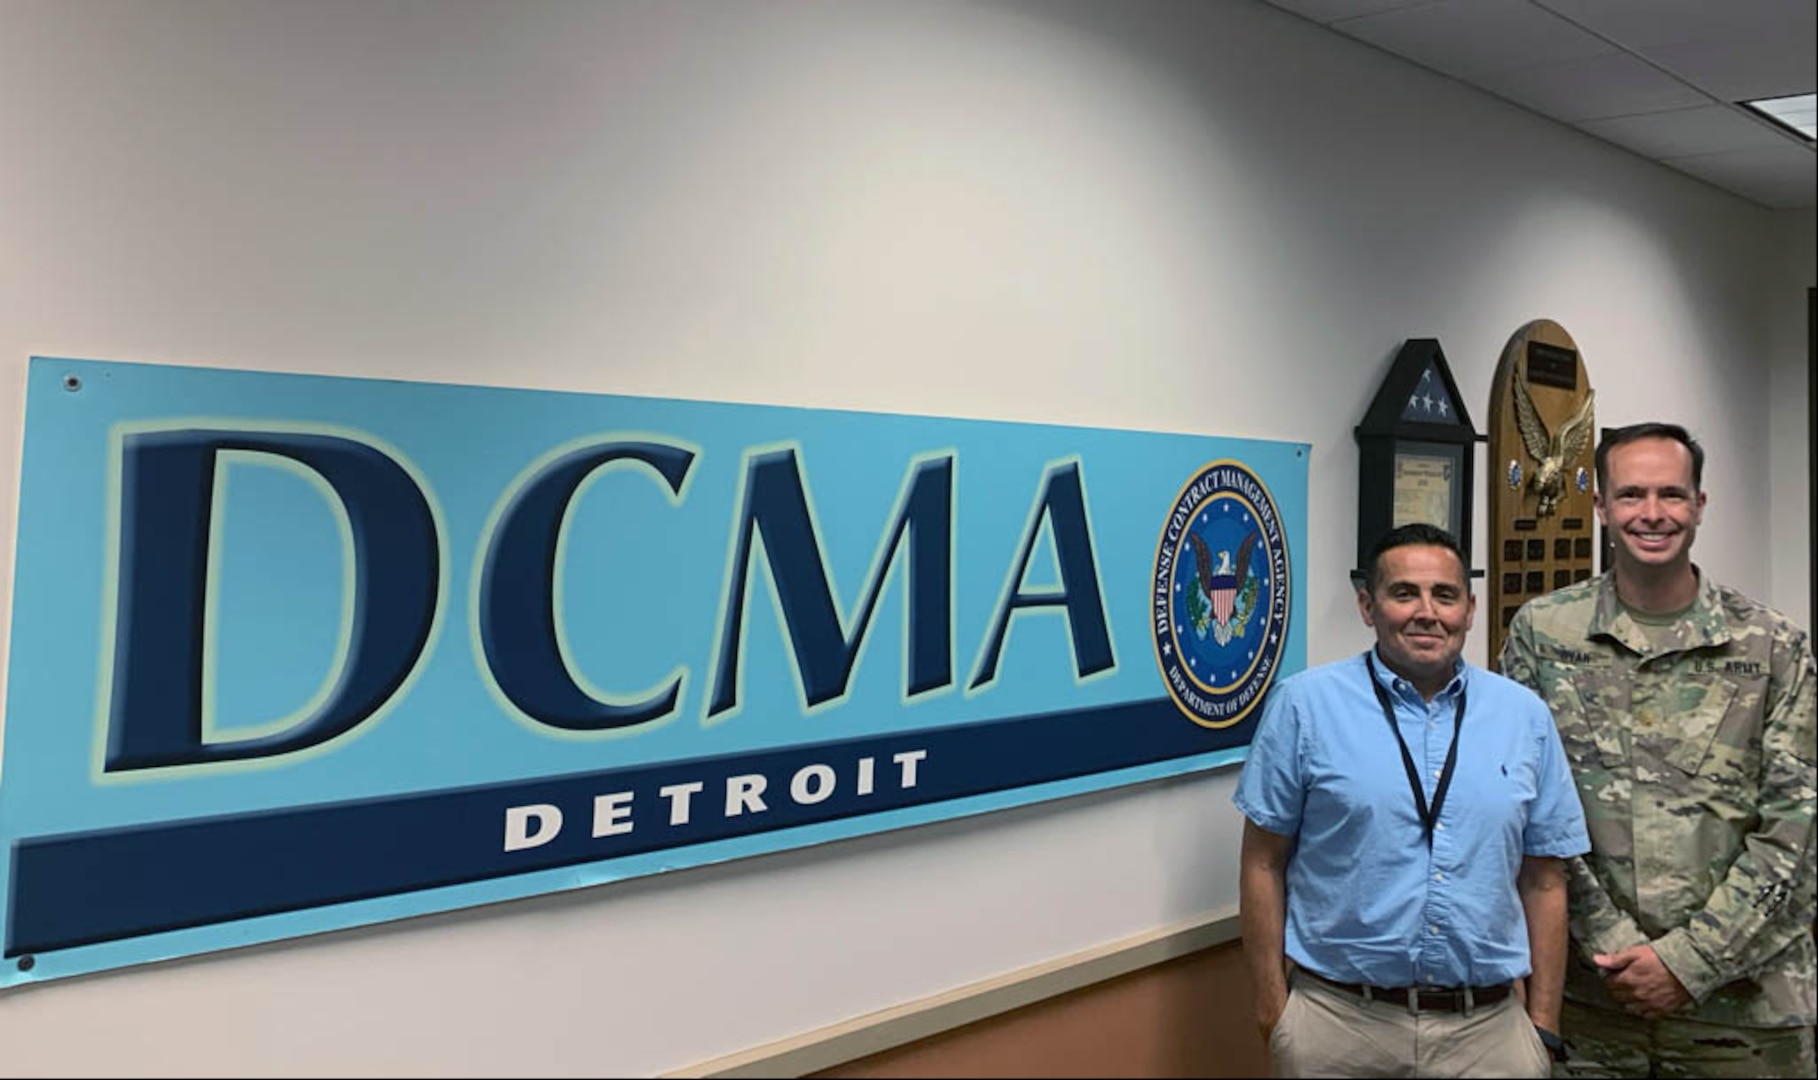 One man wearing a blue shirt and khaki pants and another man in his Army uniform stand near the DCMA Detroit sign